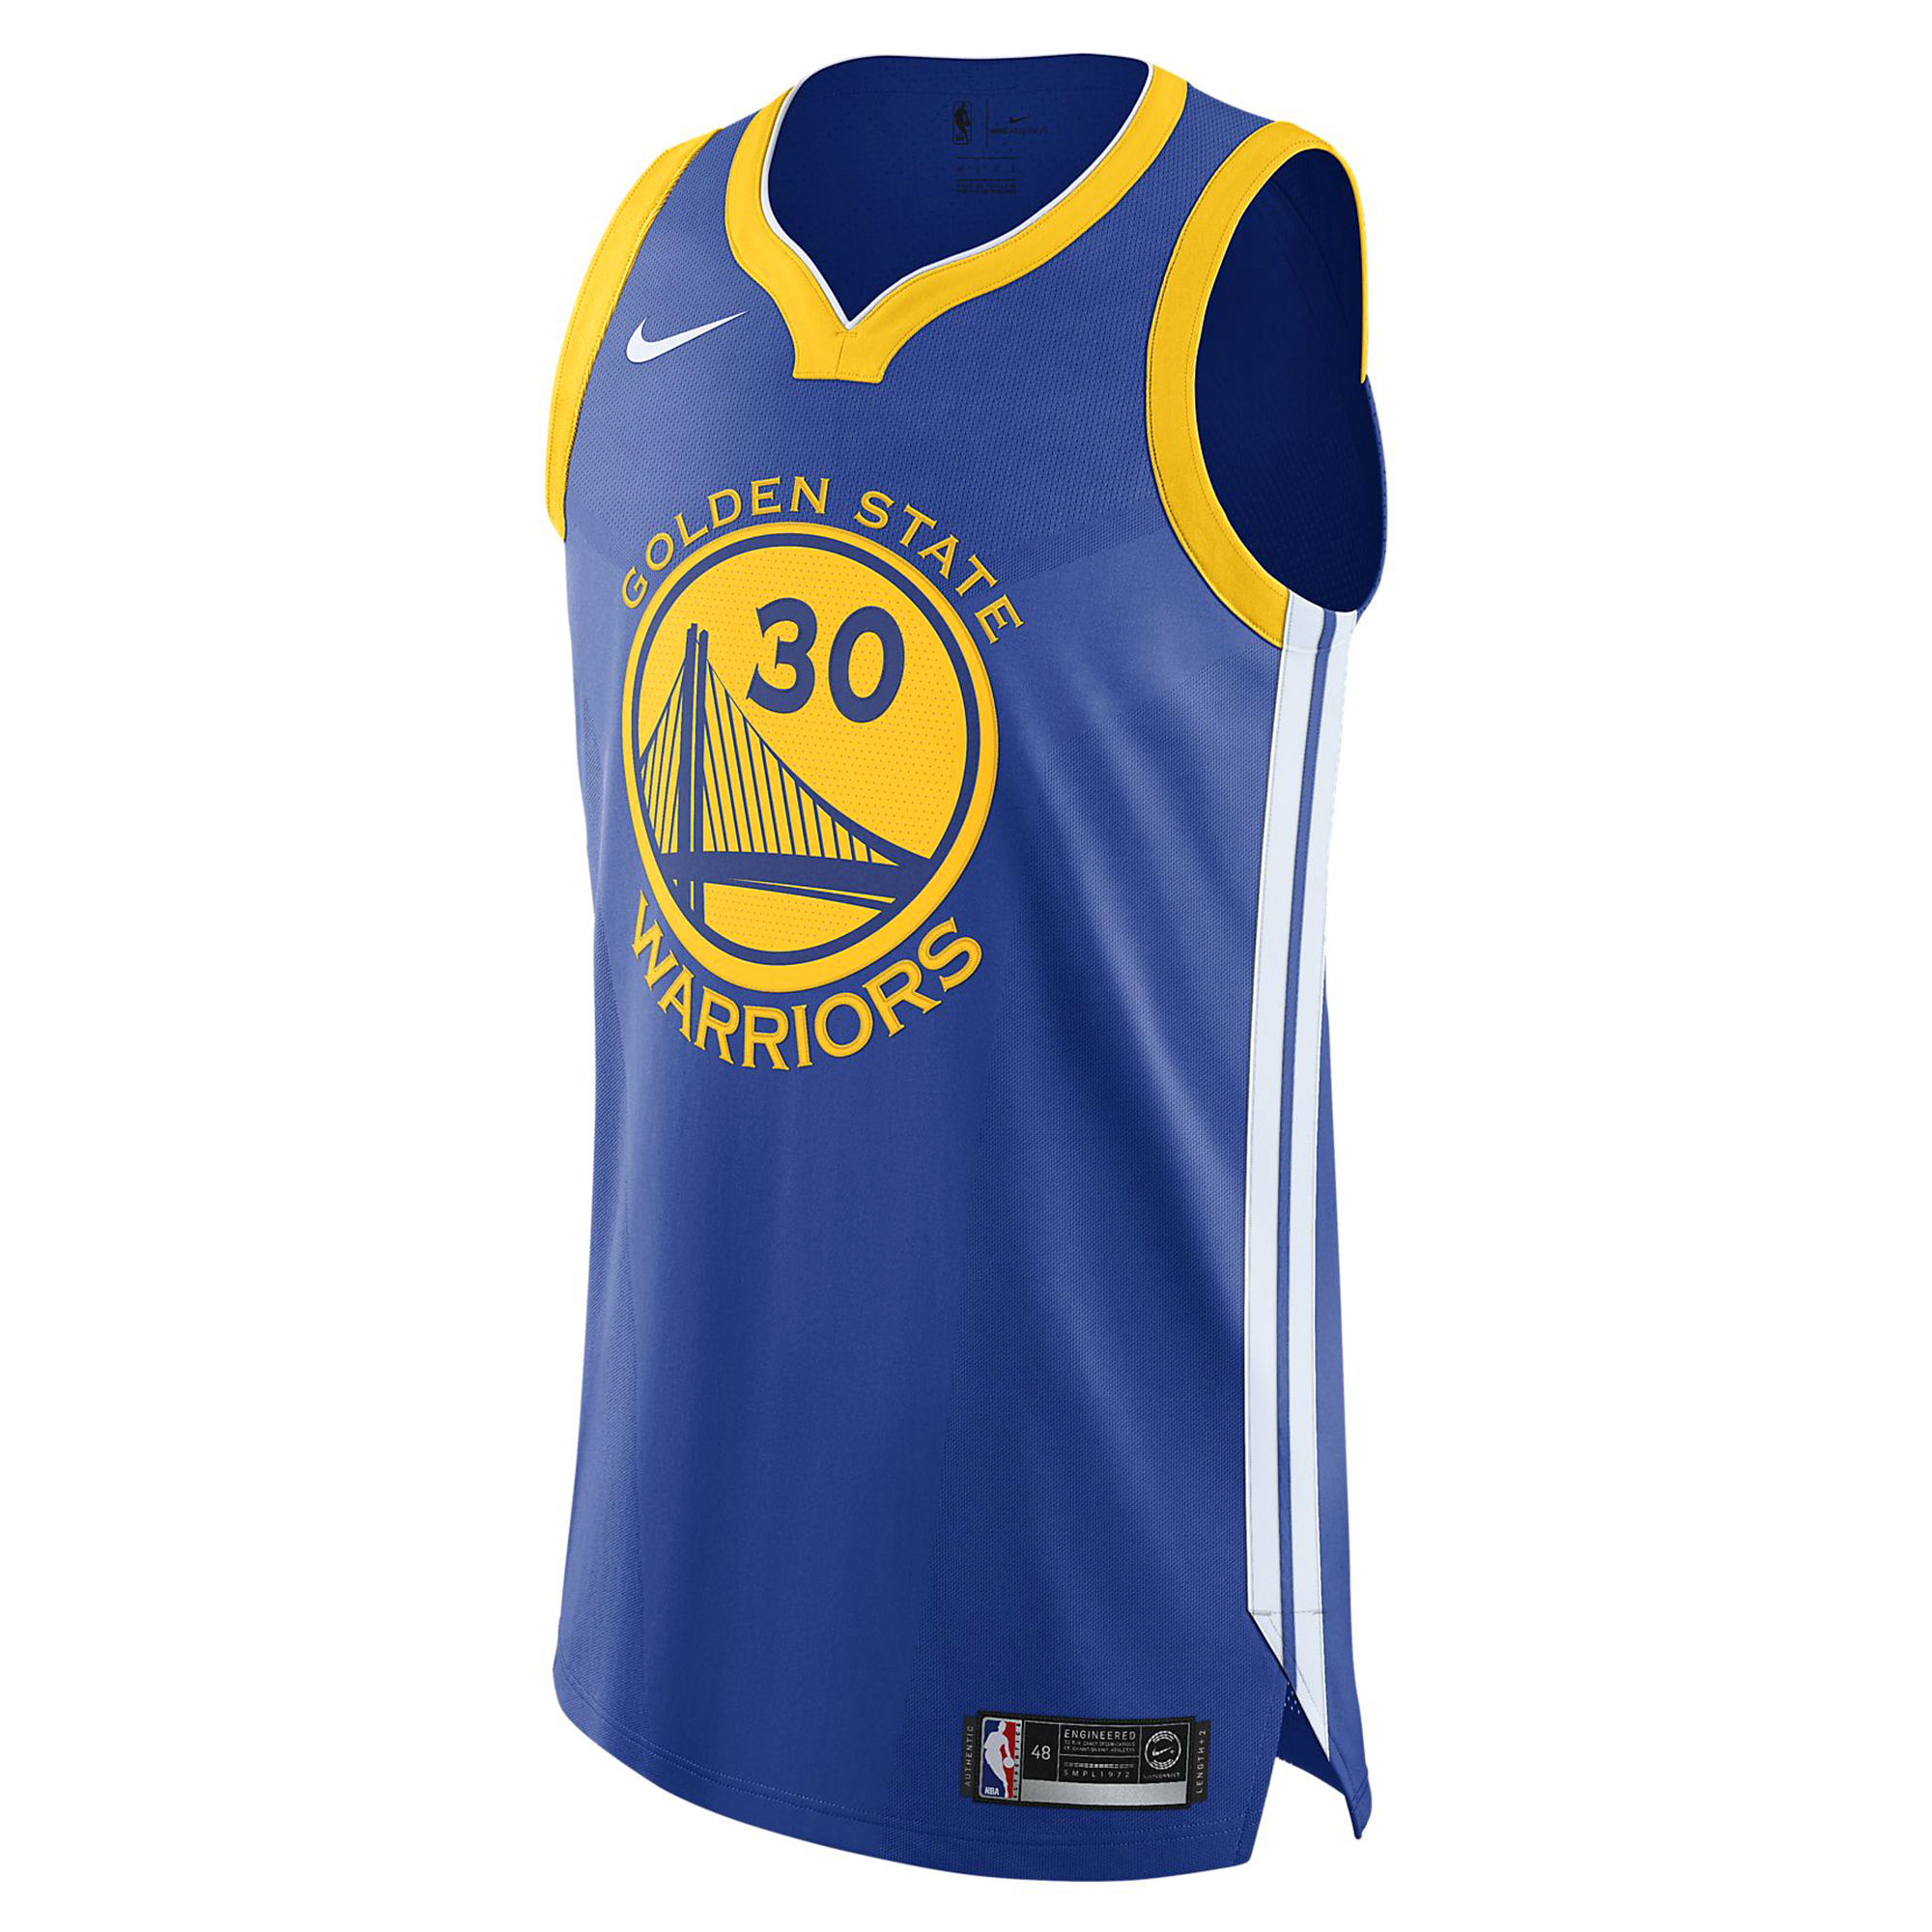 Cannon Assortment sense Nike NBA Authentic Jersey Stephen Curry Warriors Icon Edition Royal  Blue-Yellow 863022-495